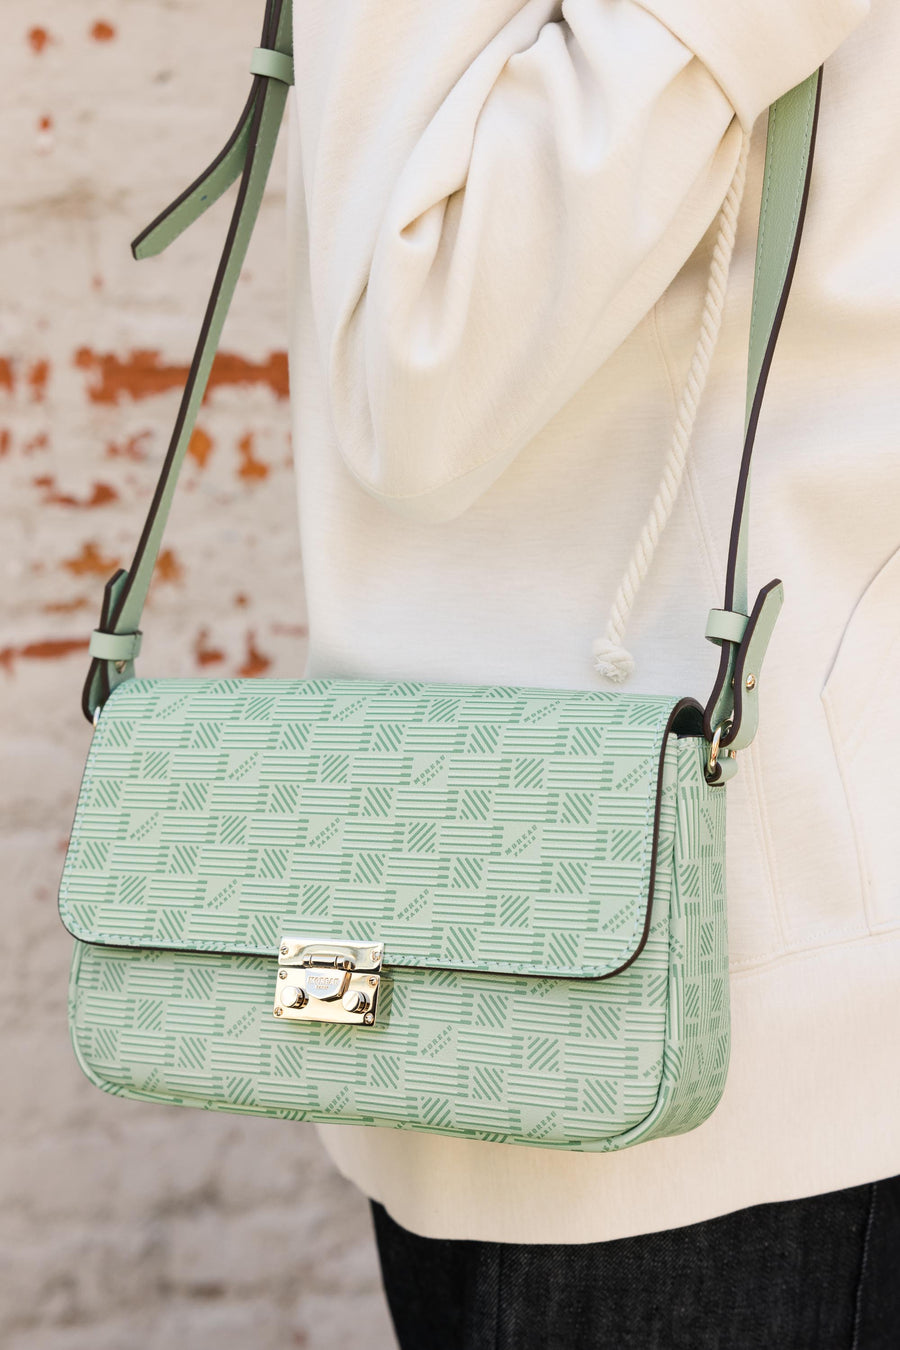 Small Croisette Bag in Mint